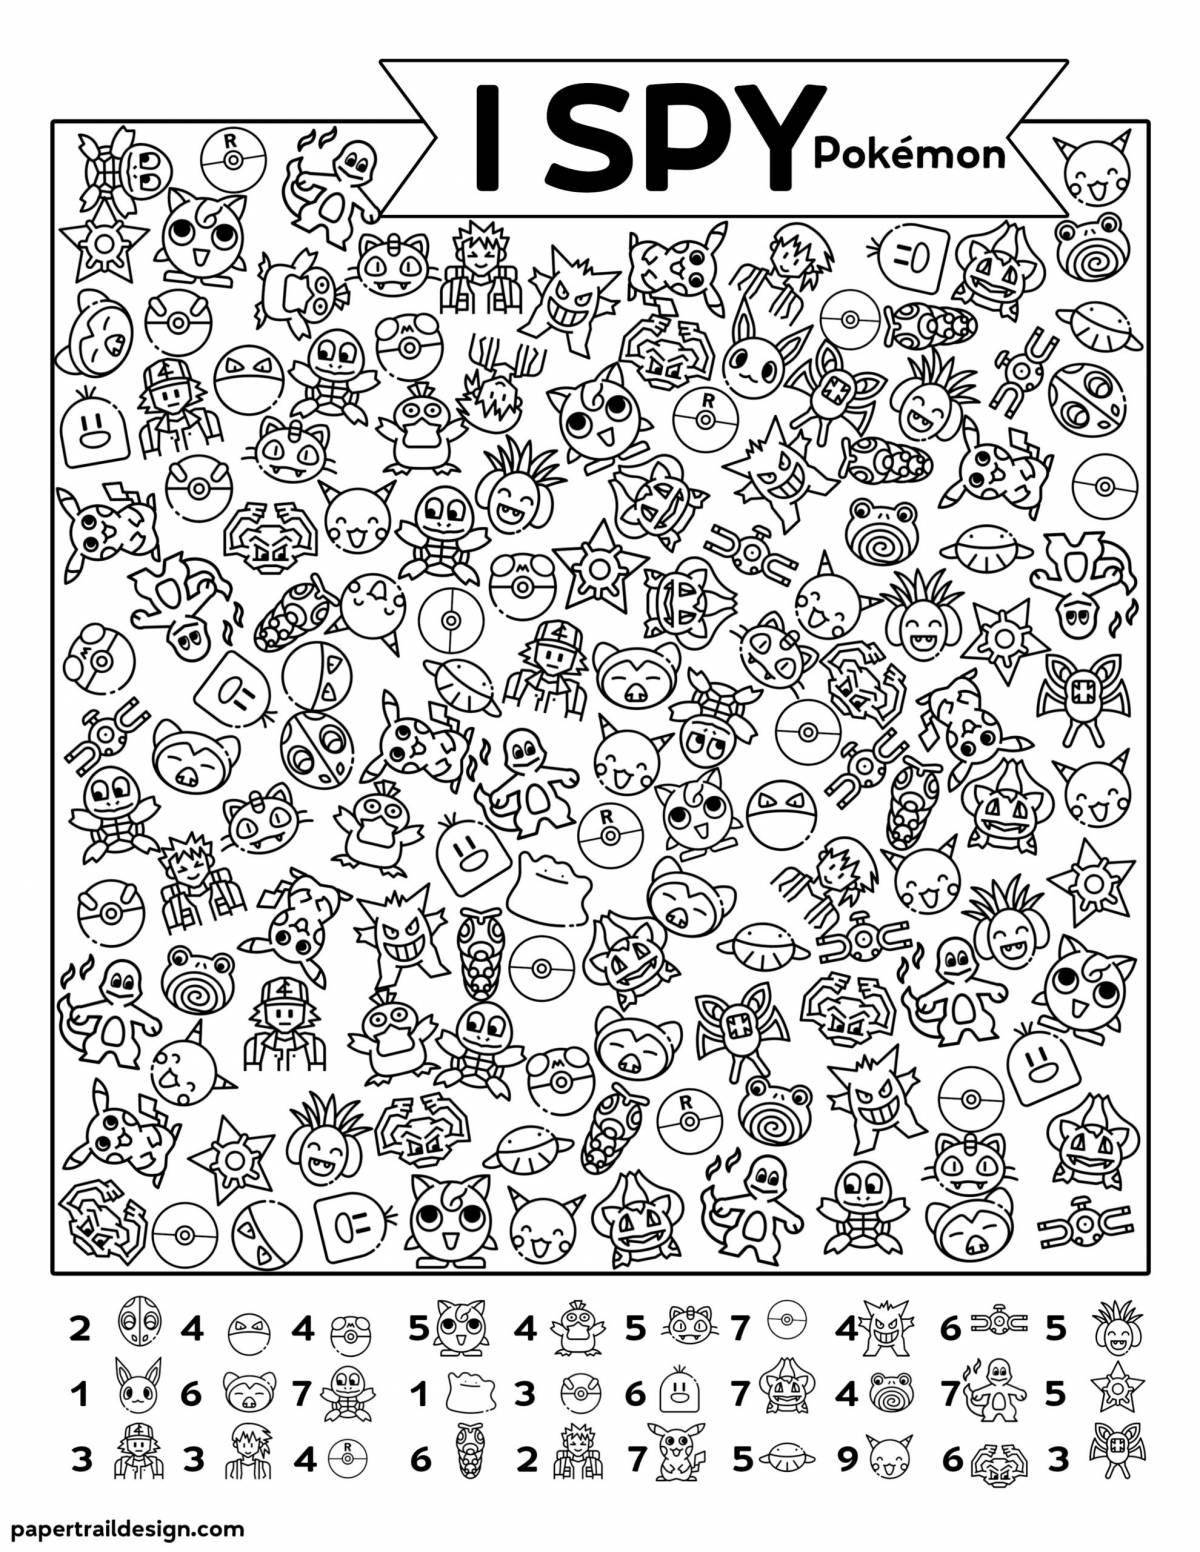 Inspirational coloring pages to practice mindfulness